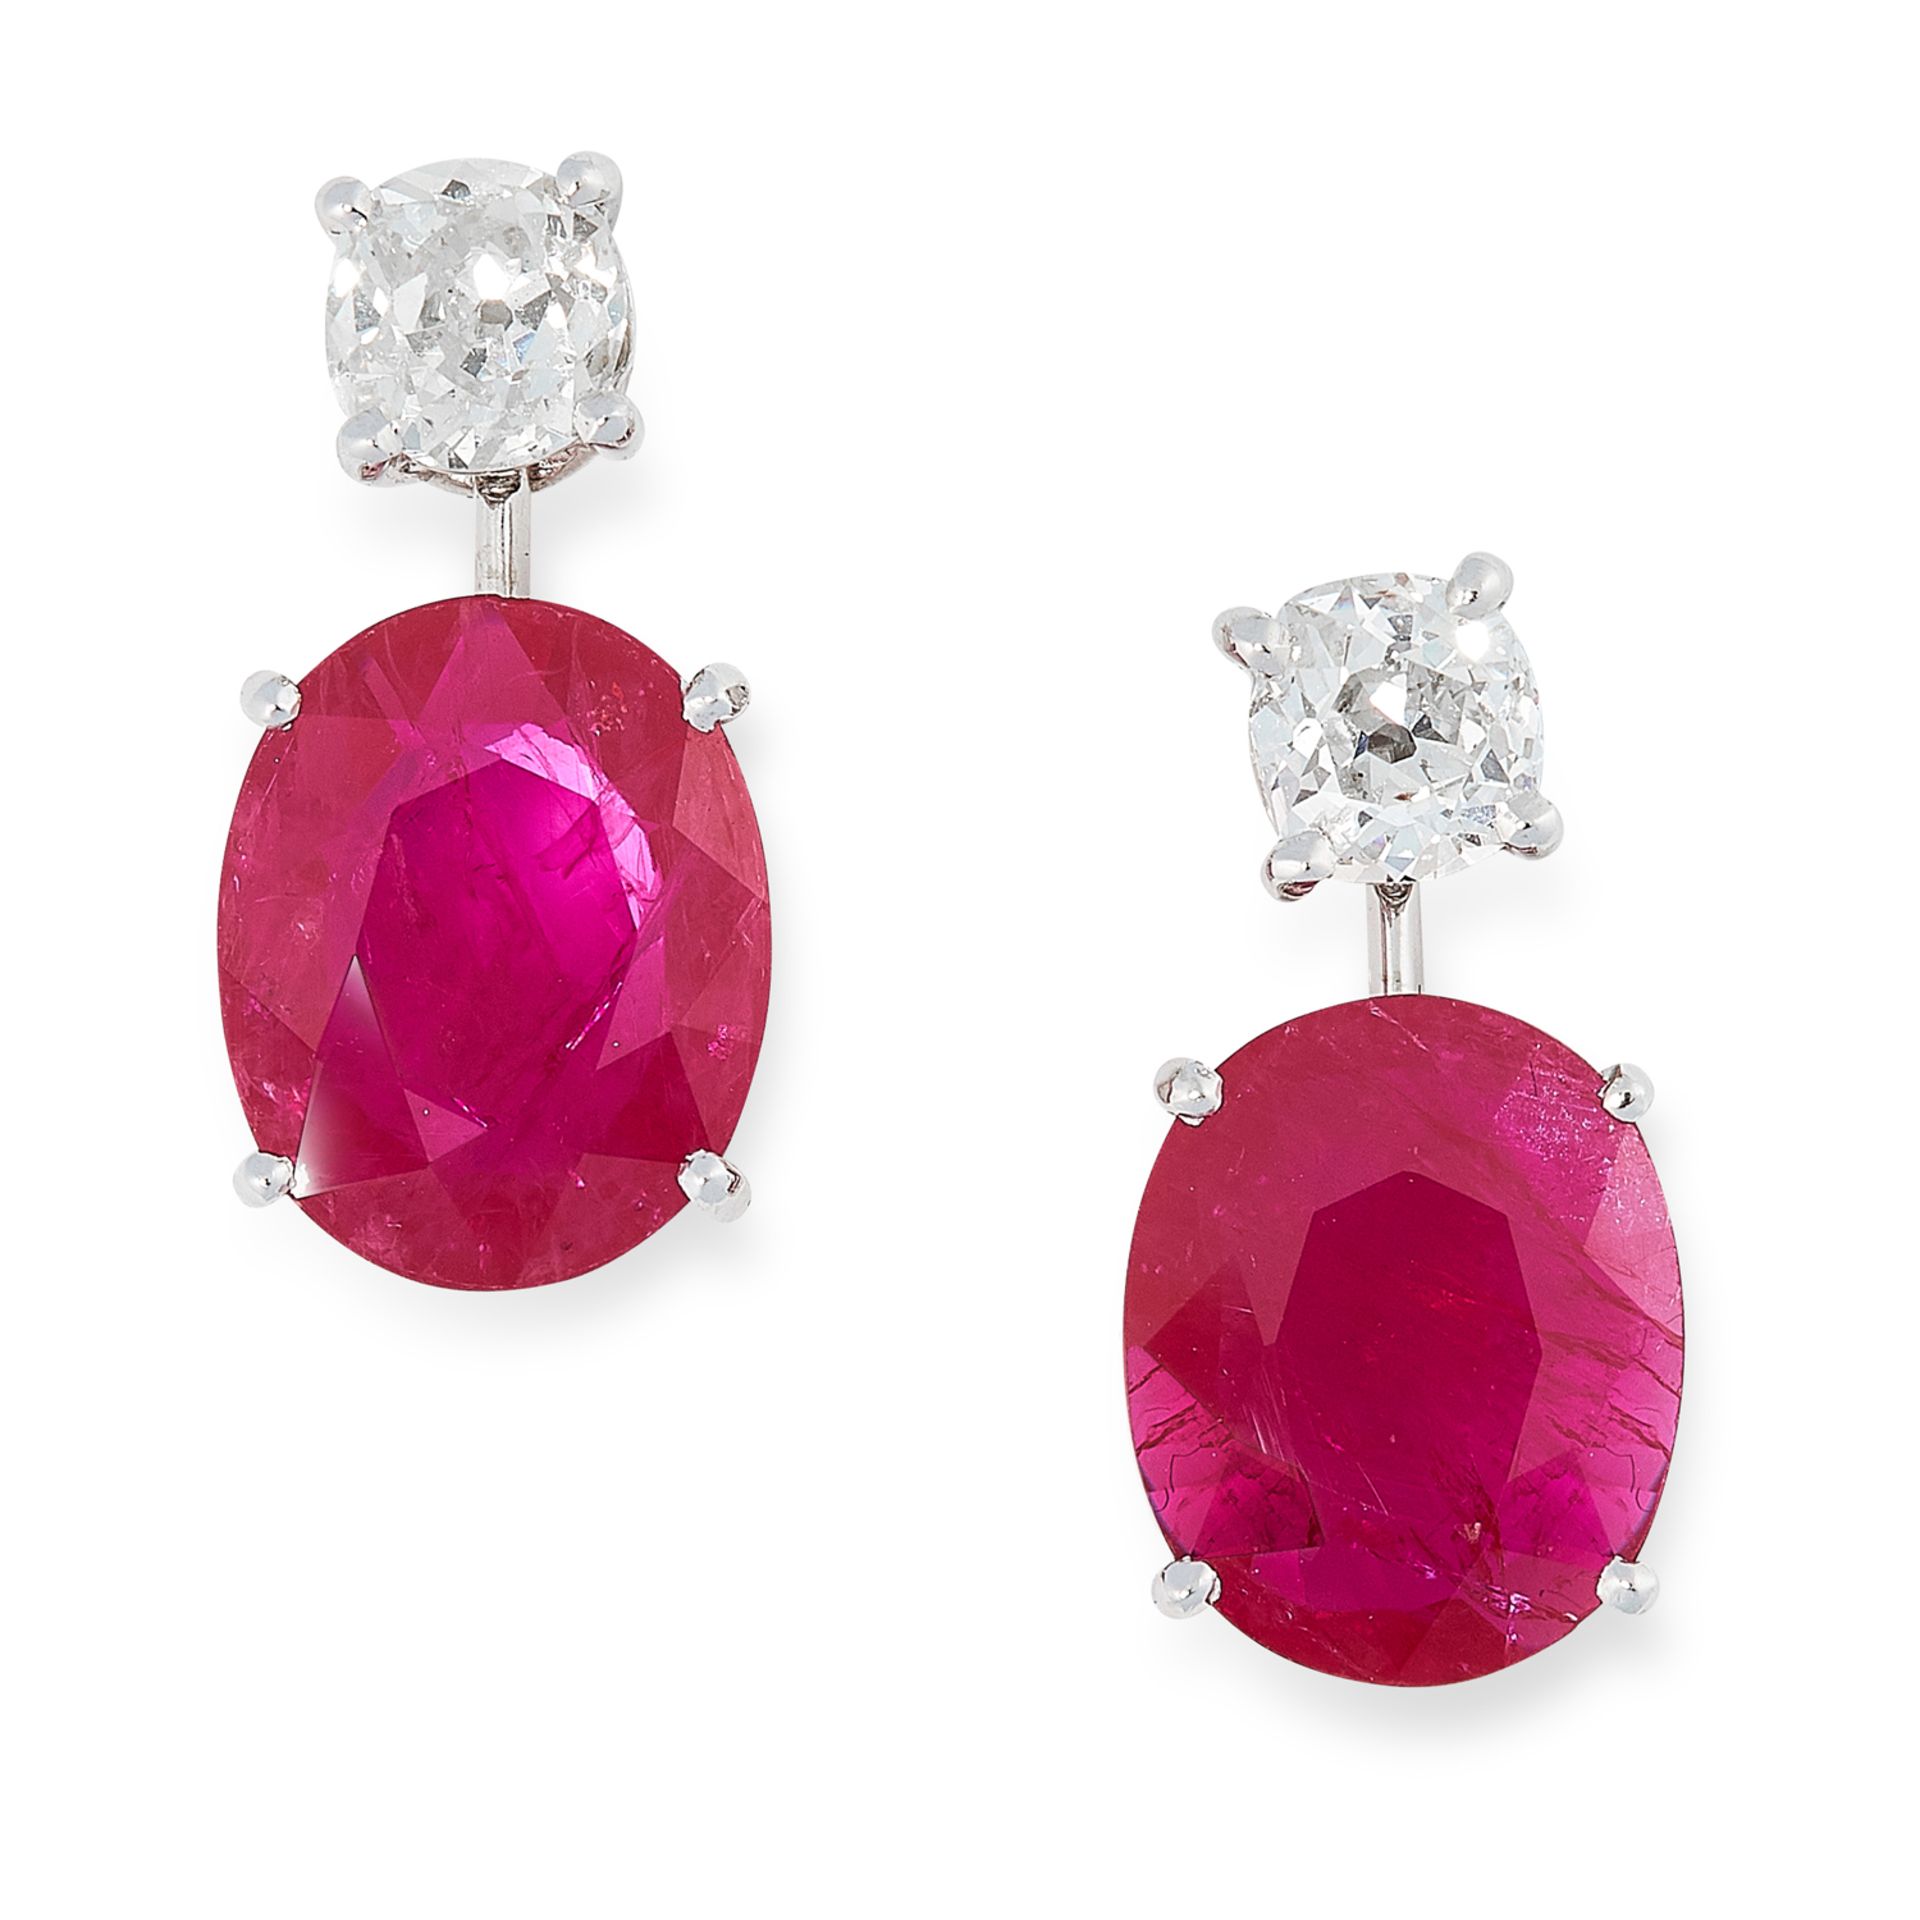 A PAIR OF RUBY AND DIAMOND EARRINGS in high carat white gold, each set with an oval cut ruby below a